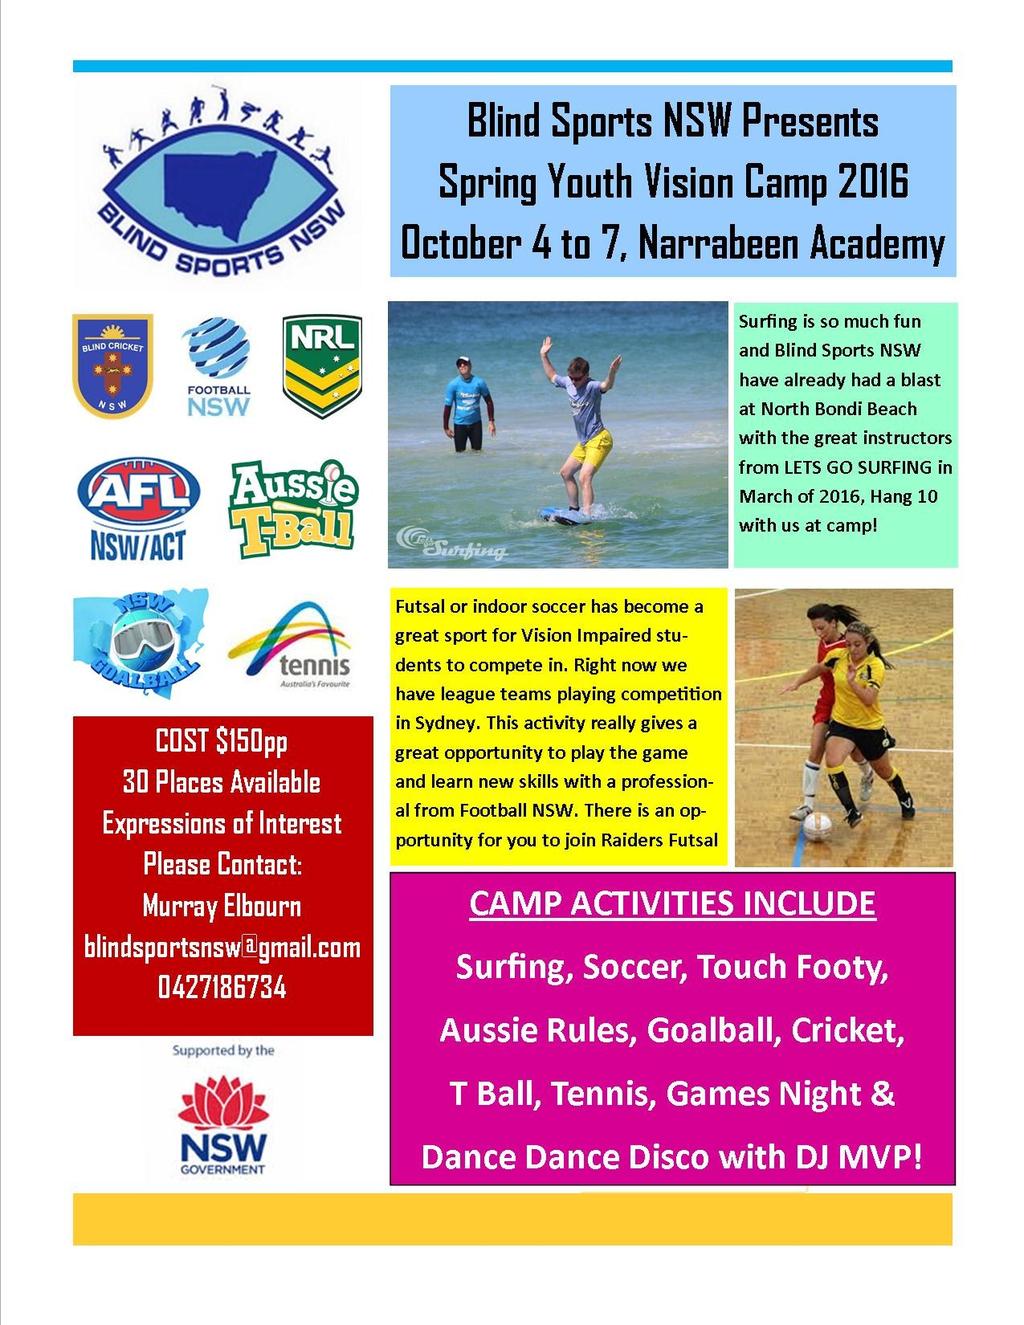 YOUTH VISION CAMP SPOTS STILL AVAILABLE TILL SEPTEMBER 17TH Go to www.sportandrecreation.nsw.gov.